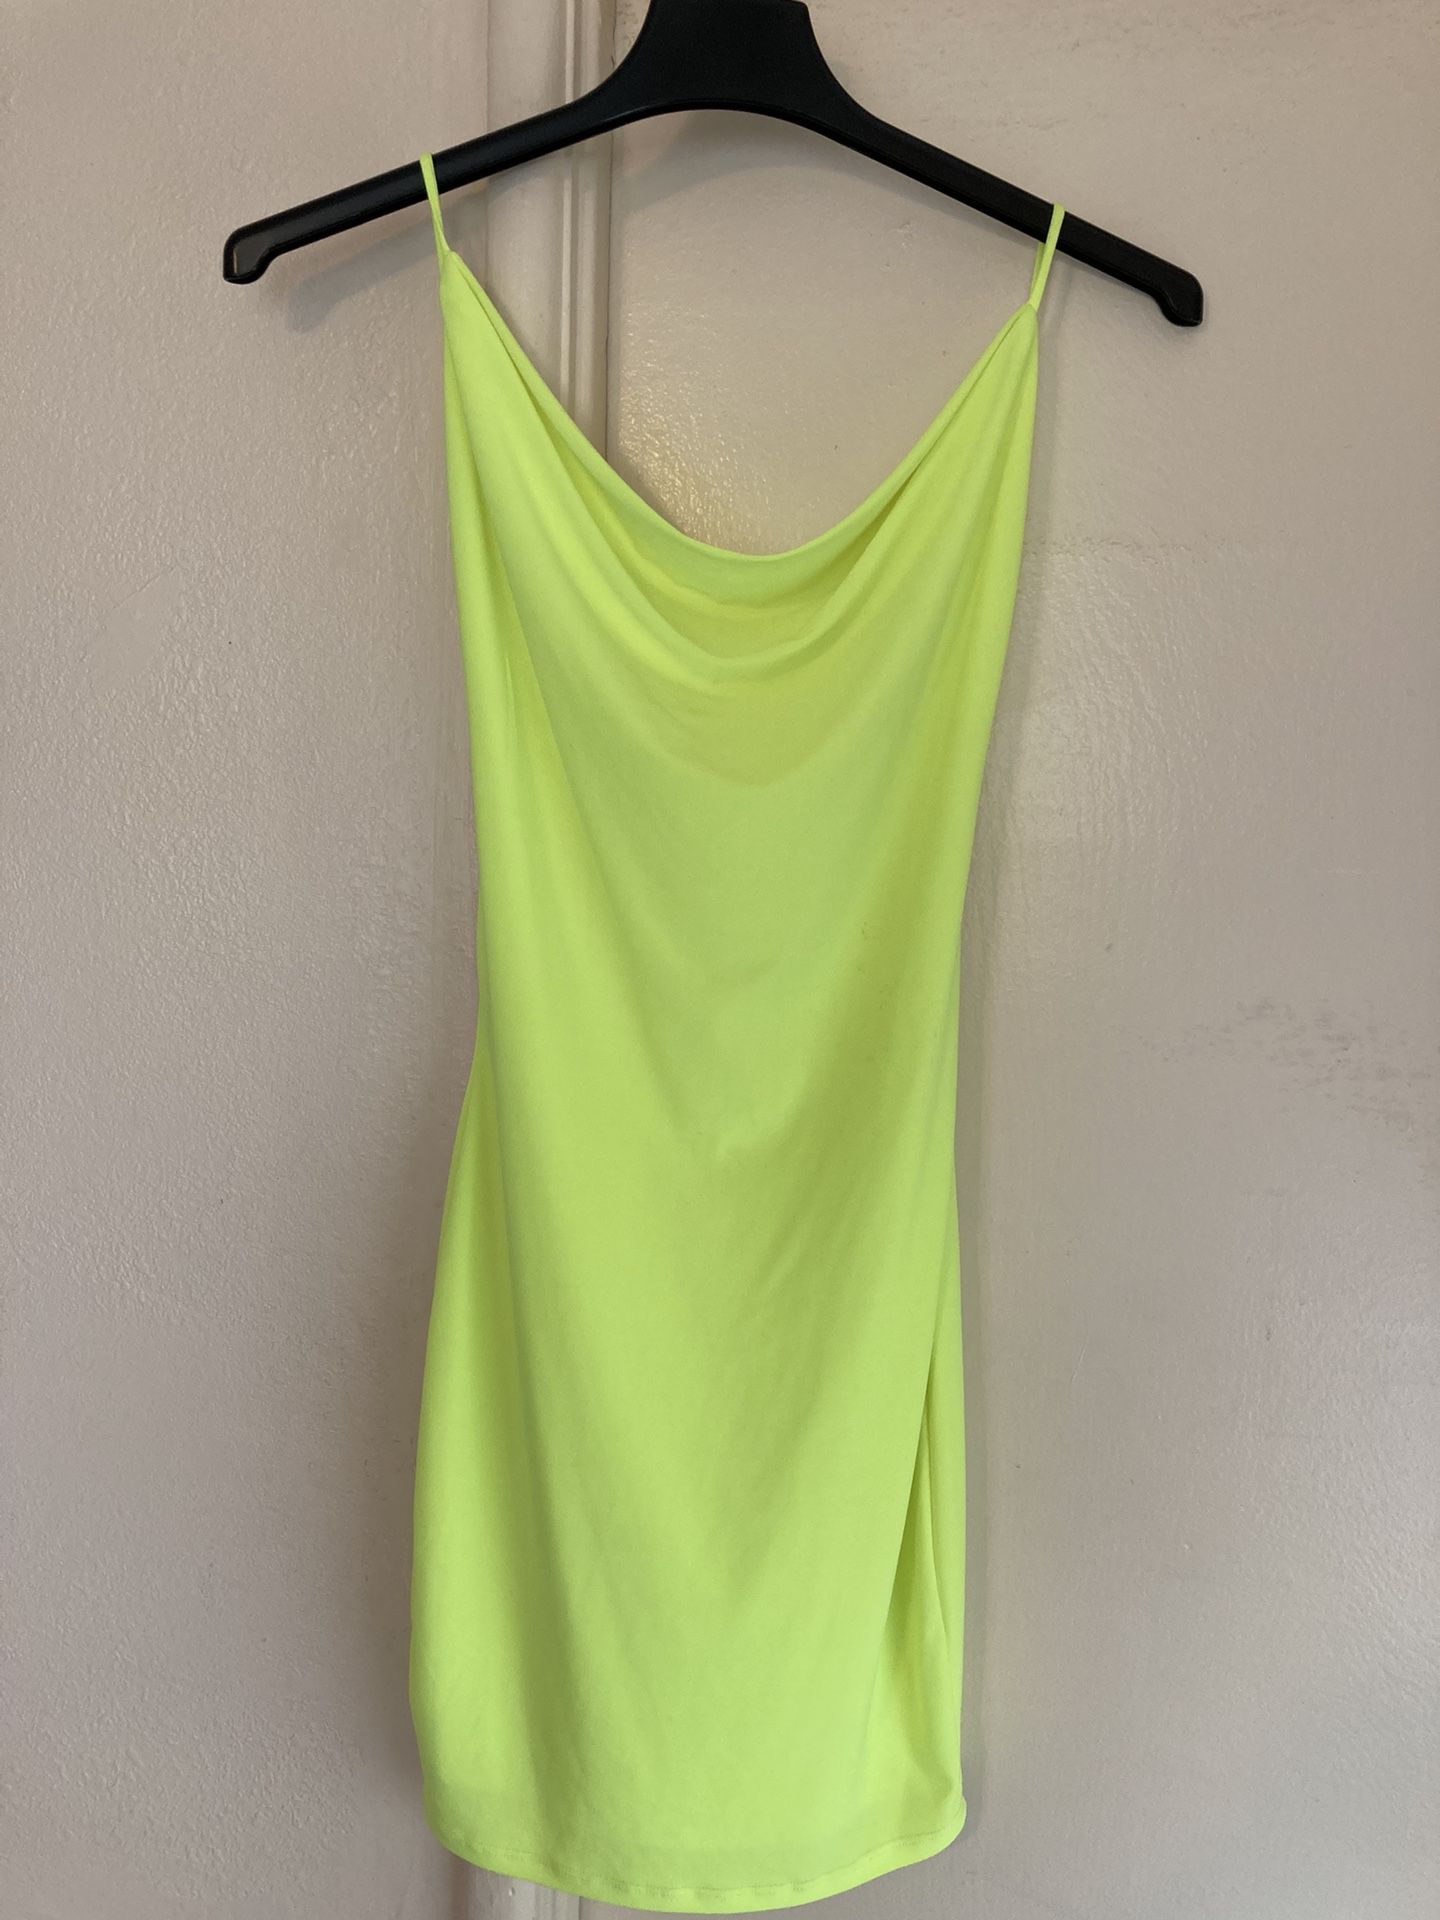 Day &Night Women Dress Yellow Color Sleeveless For Cocktail Or Dinner Size Small 